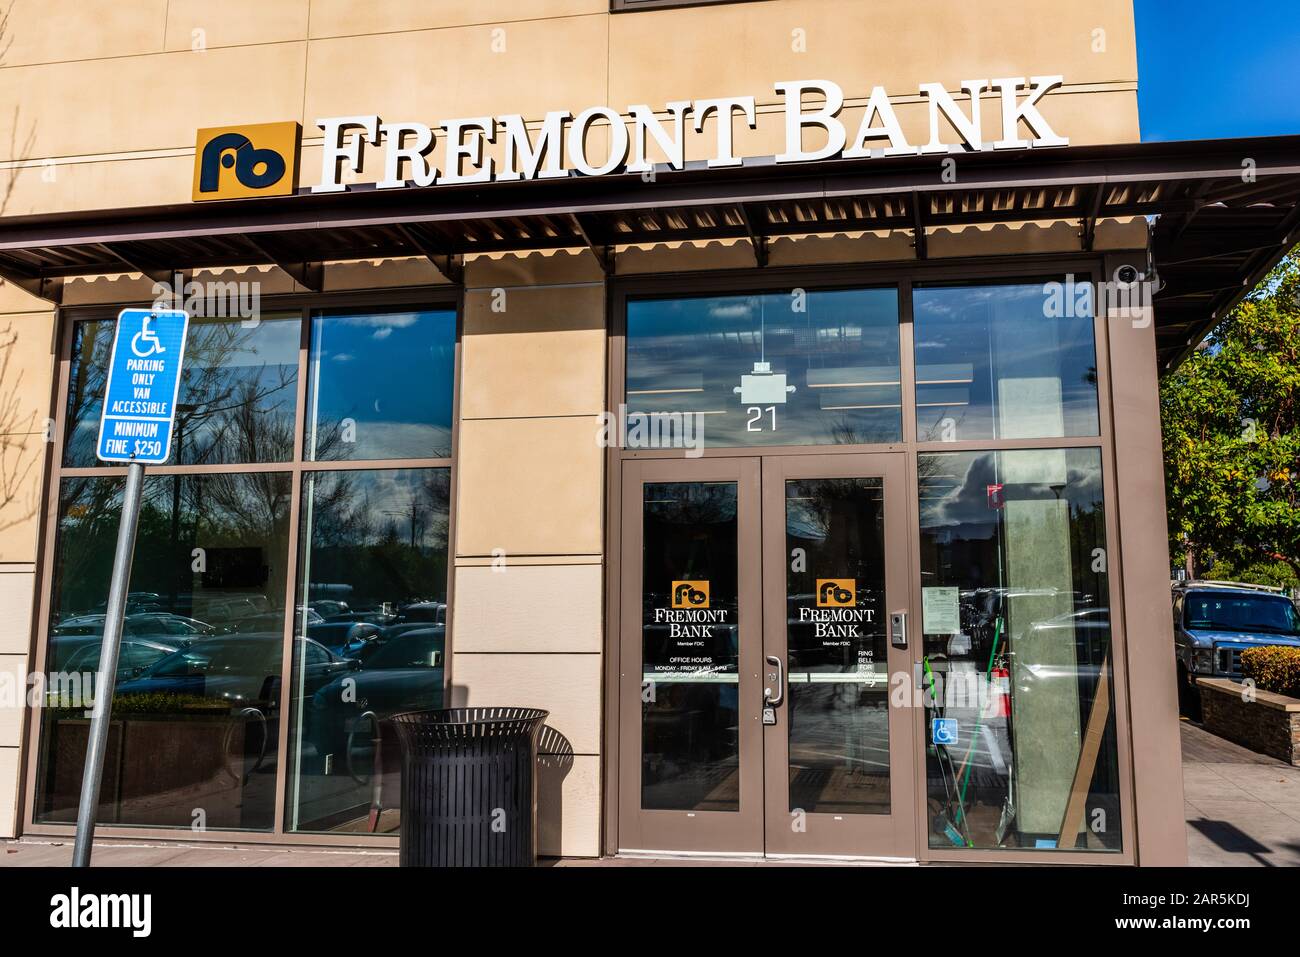 Jan 24, 2020 Mountain View / CA / USA - Fremont Bank branch in San Francisco Bay Area; Fremont Bank is a retail and commercial bank and California mor Stock Photo